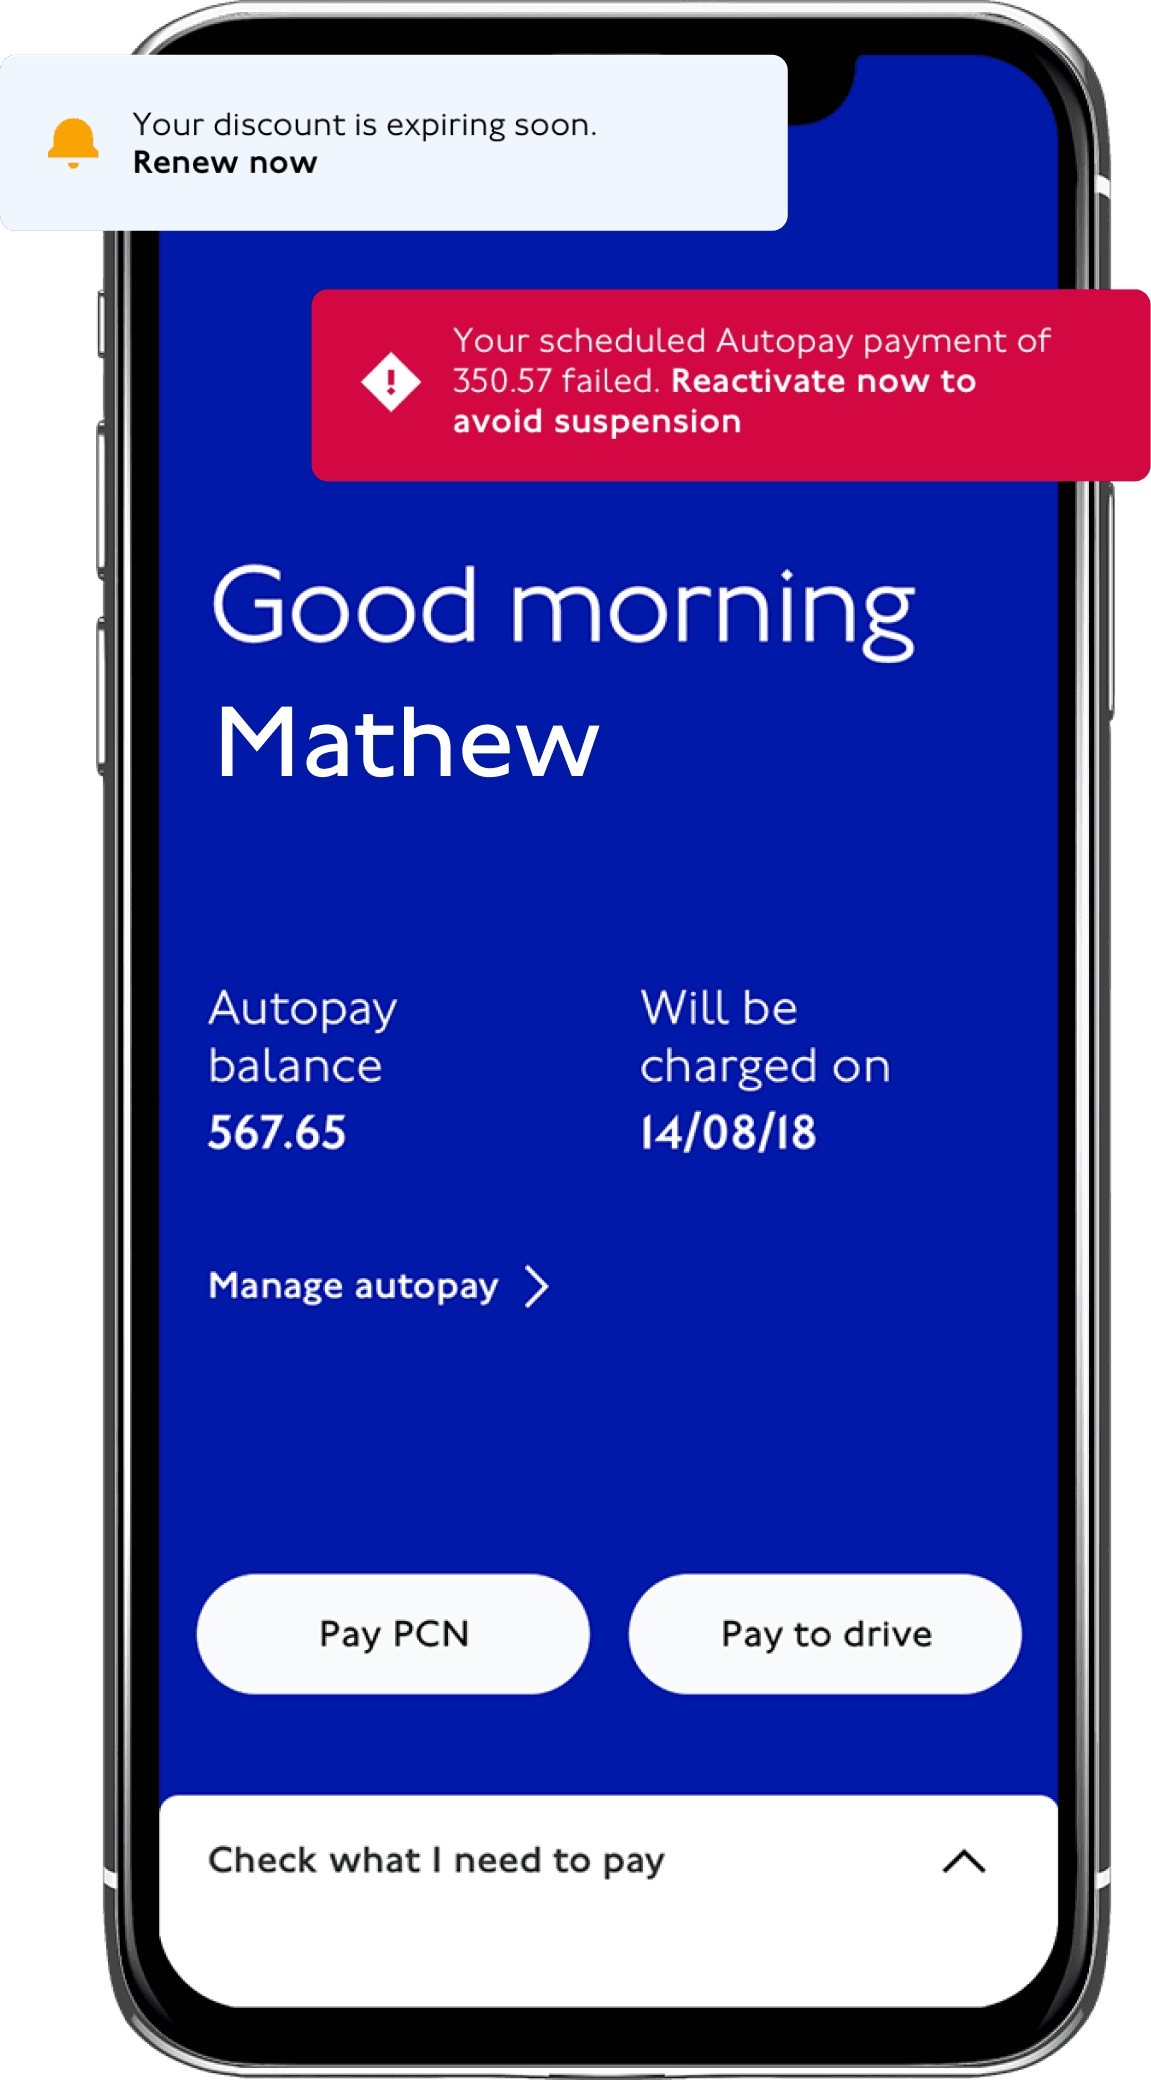 Technology and features in TfL Pay to Drive app